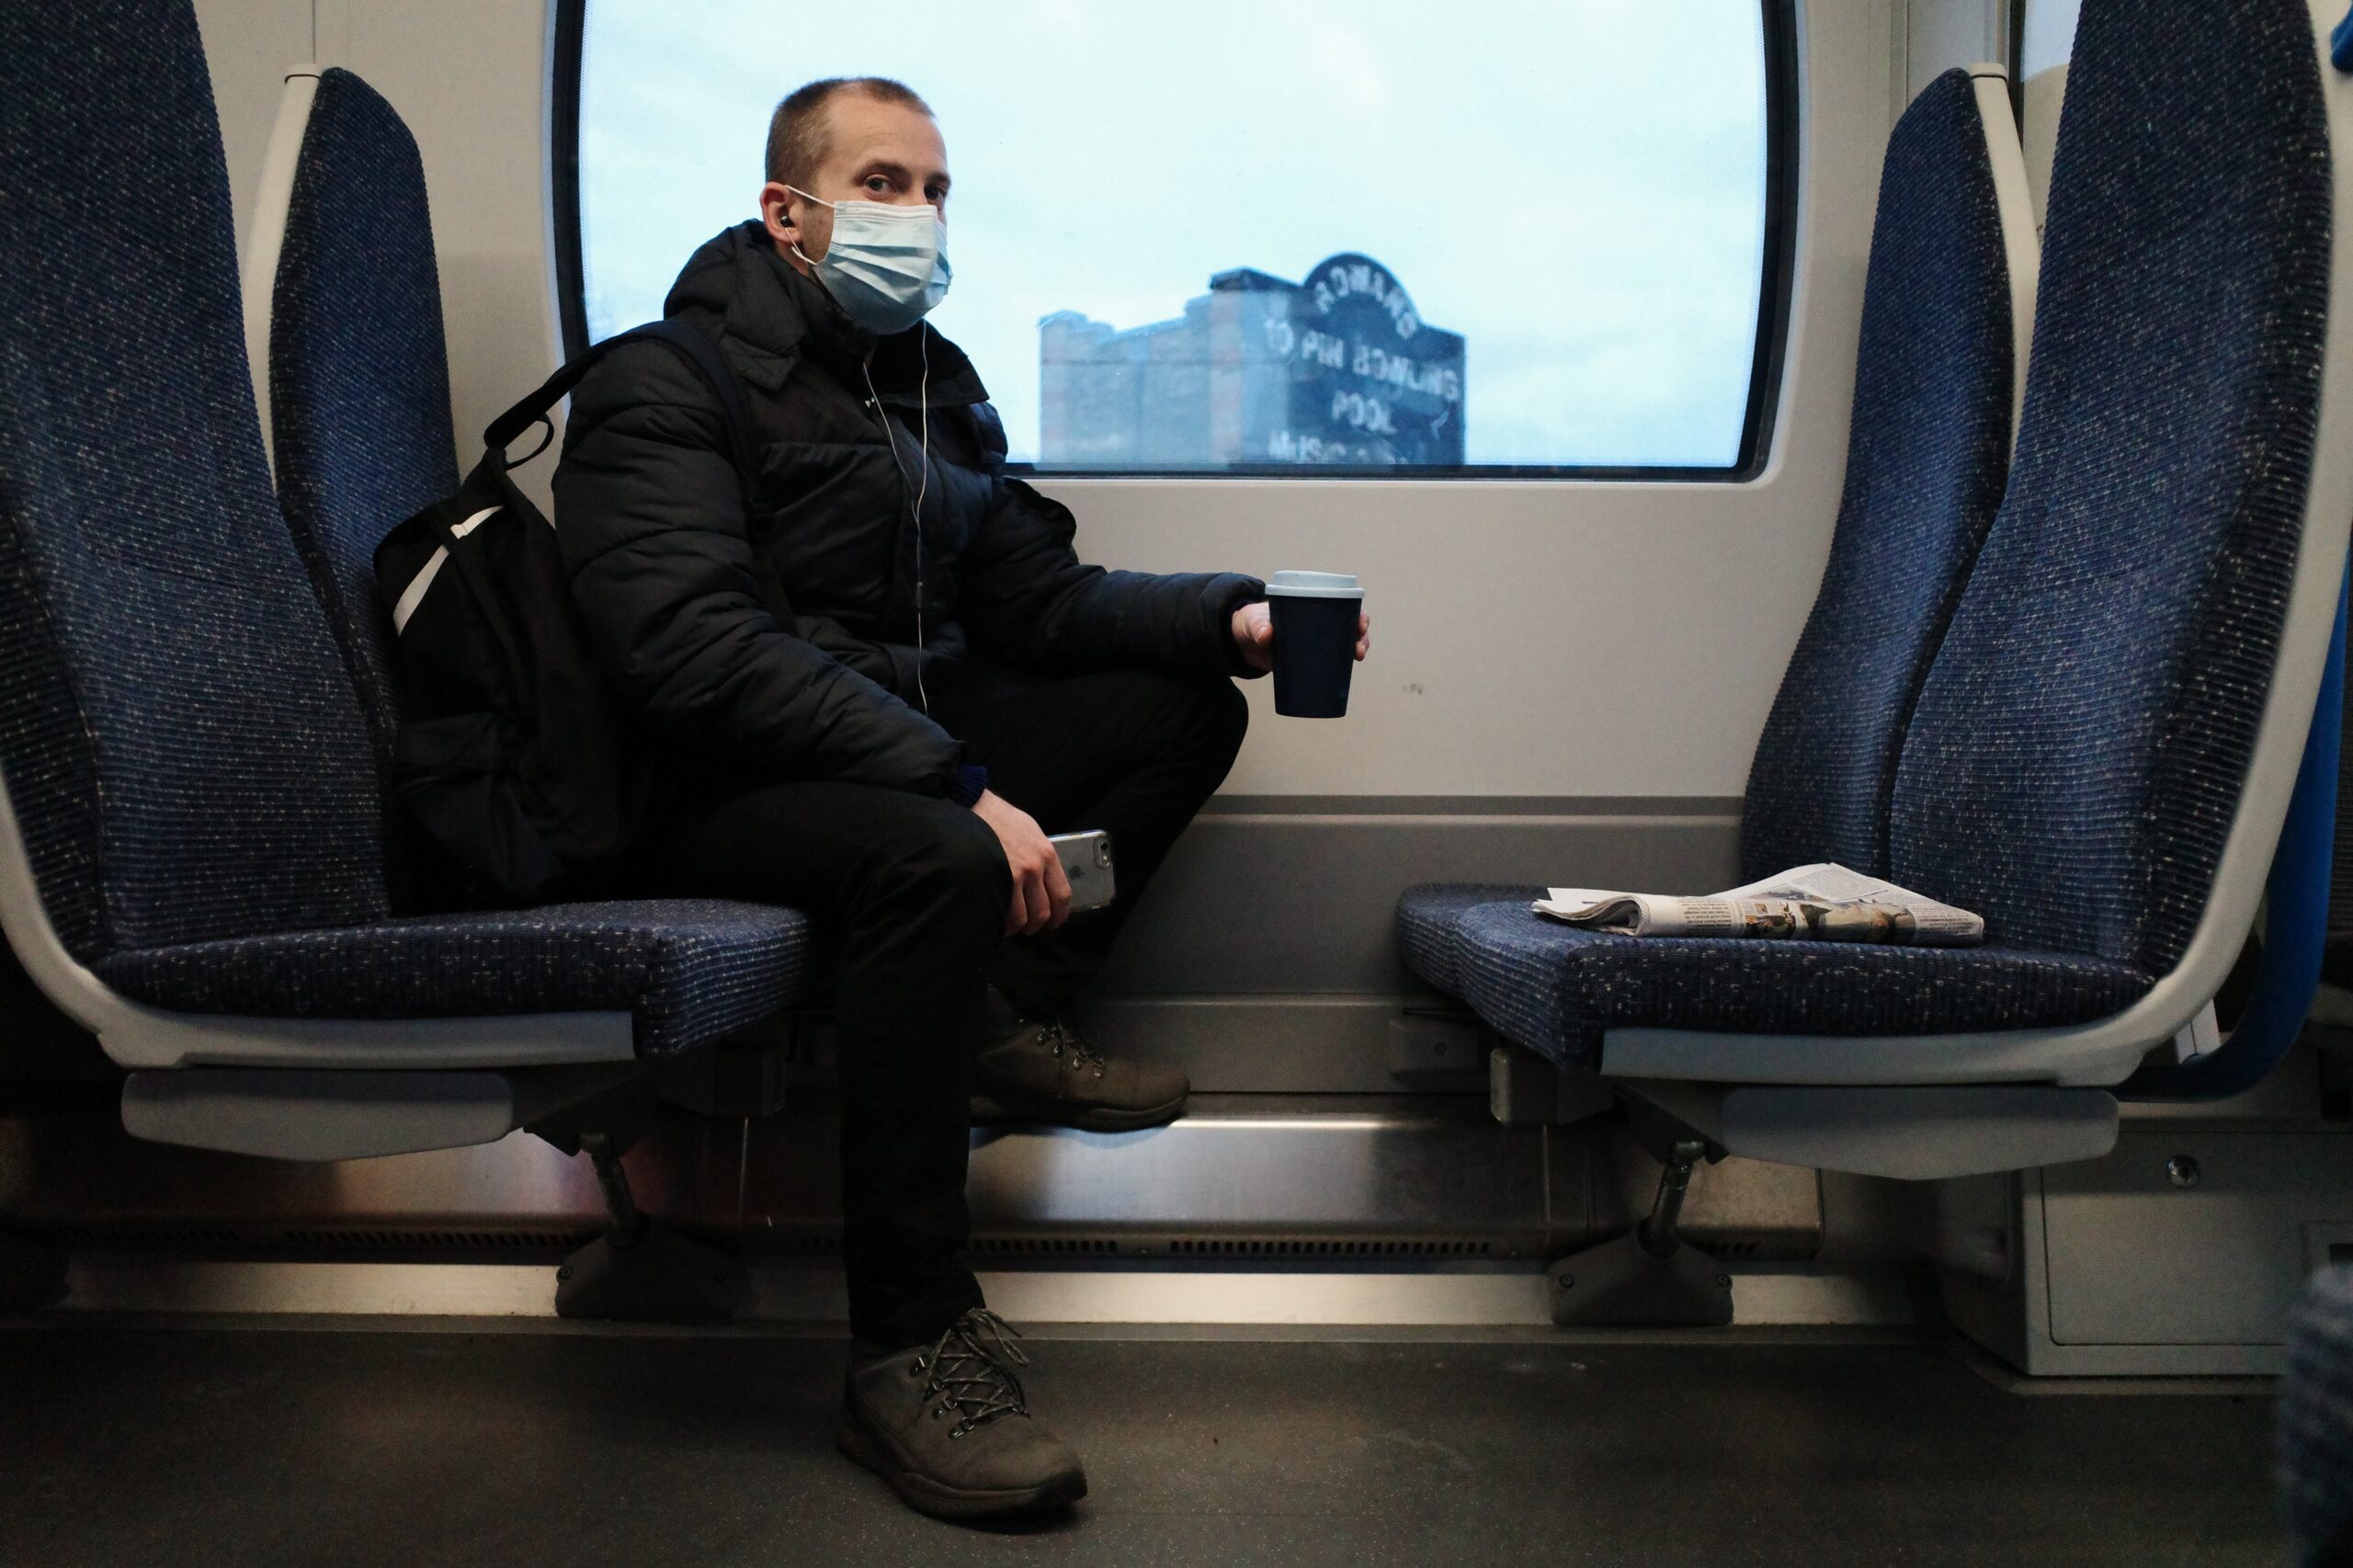 man on train in facemask holding coffee